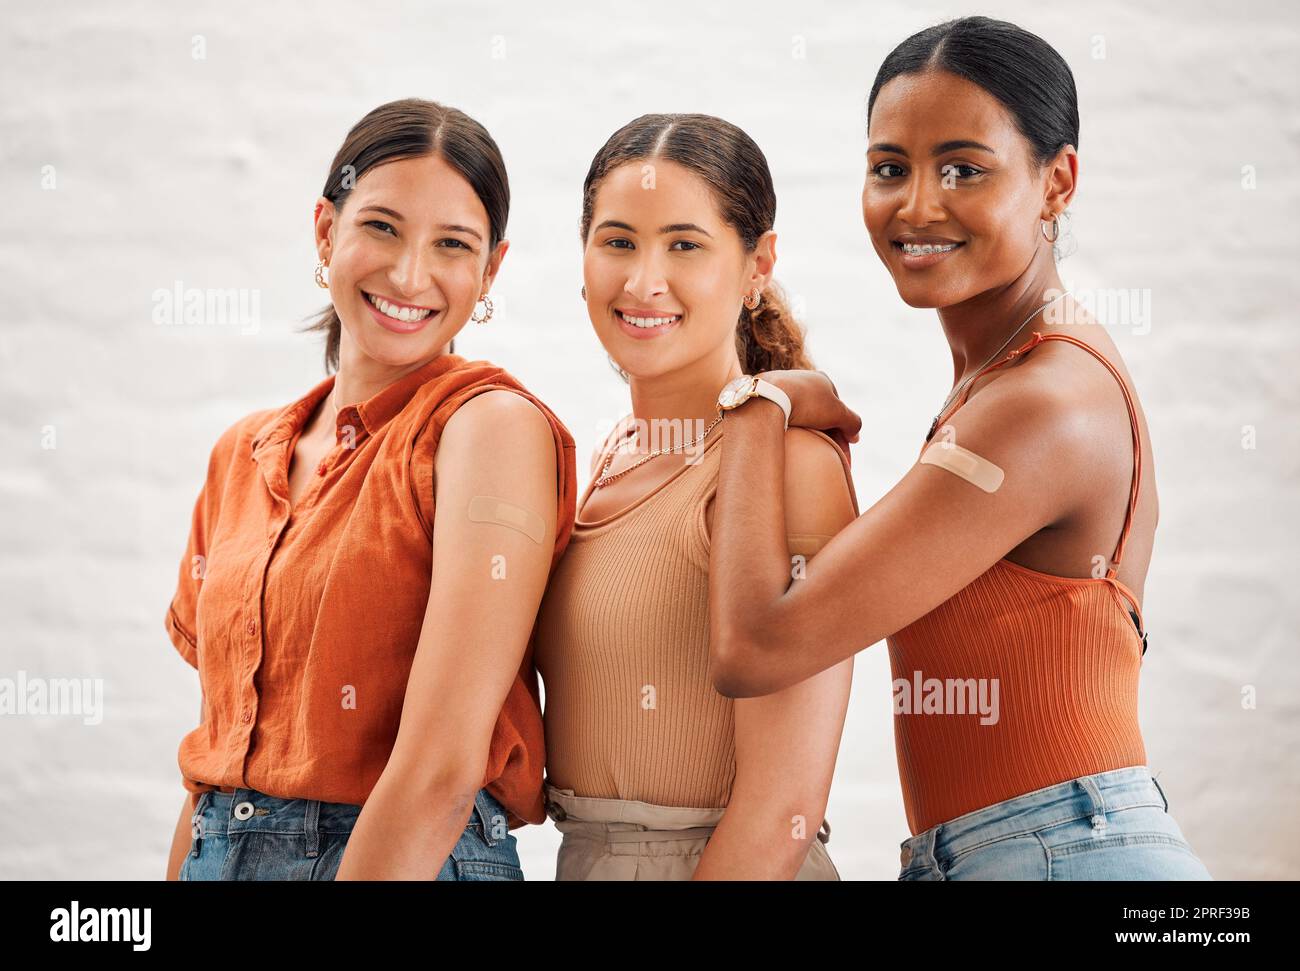 Covid vaccination or flu shot inside of girl friends, female friendship and teenagers smiling. Portrait of a happy and diverse friend group standing and practicing good health habits together Stock Photo